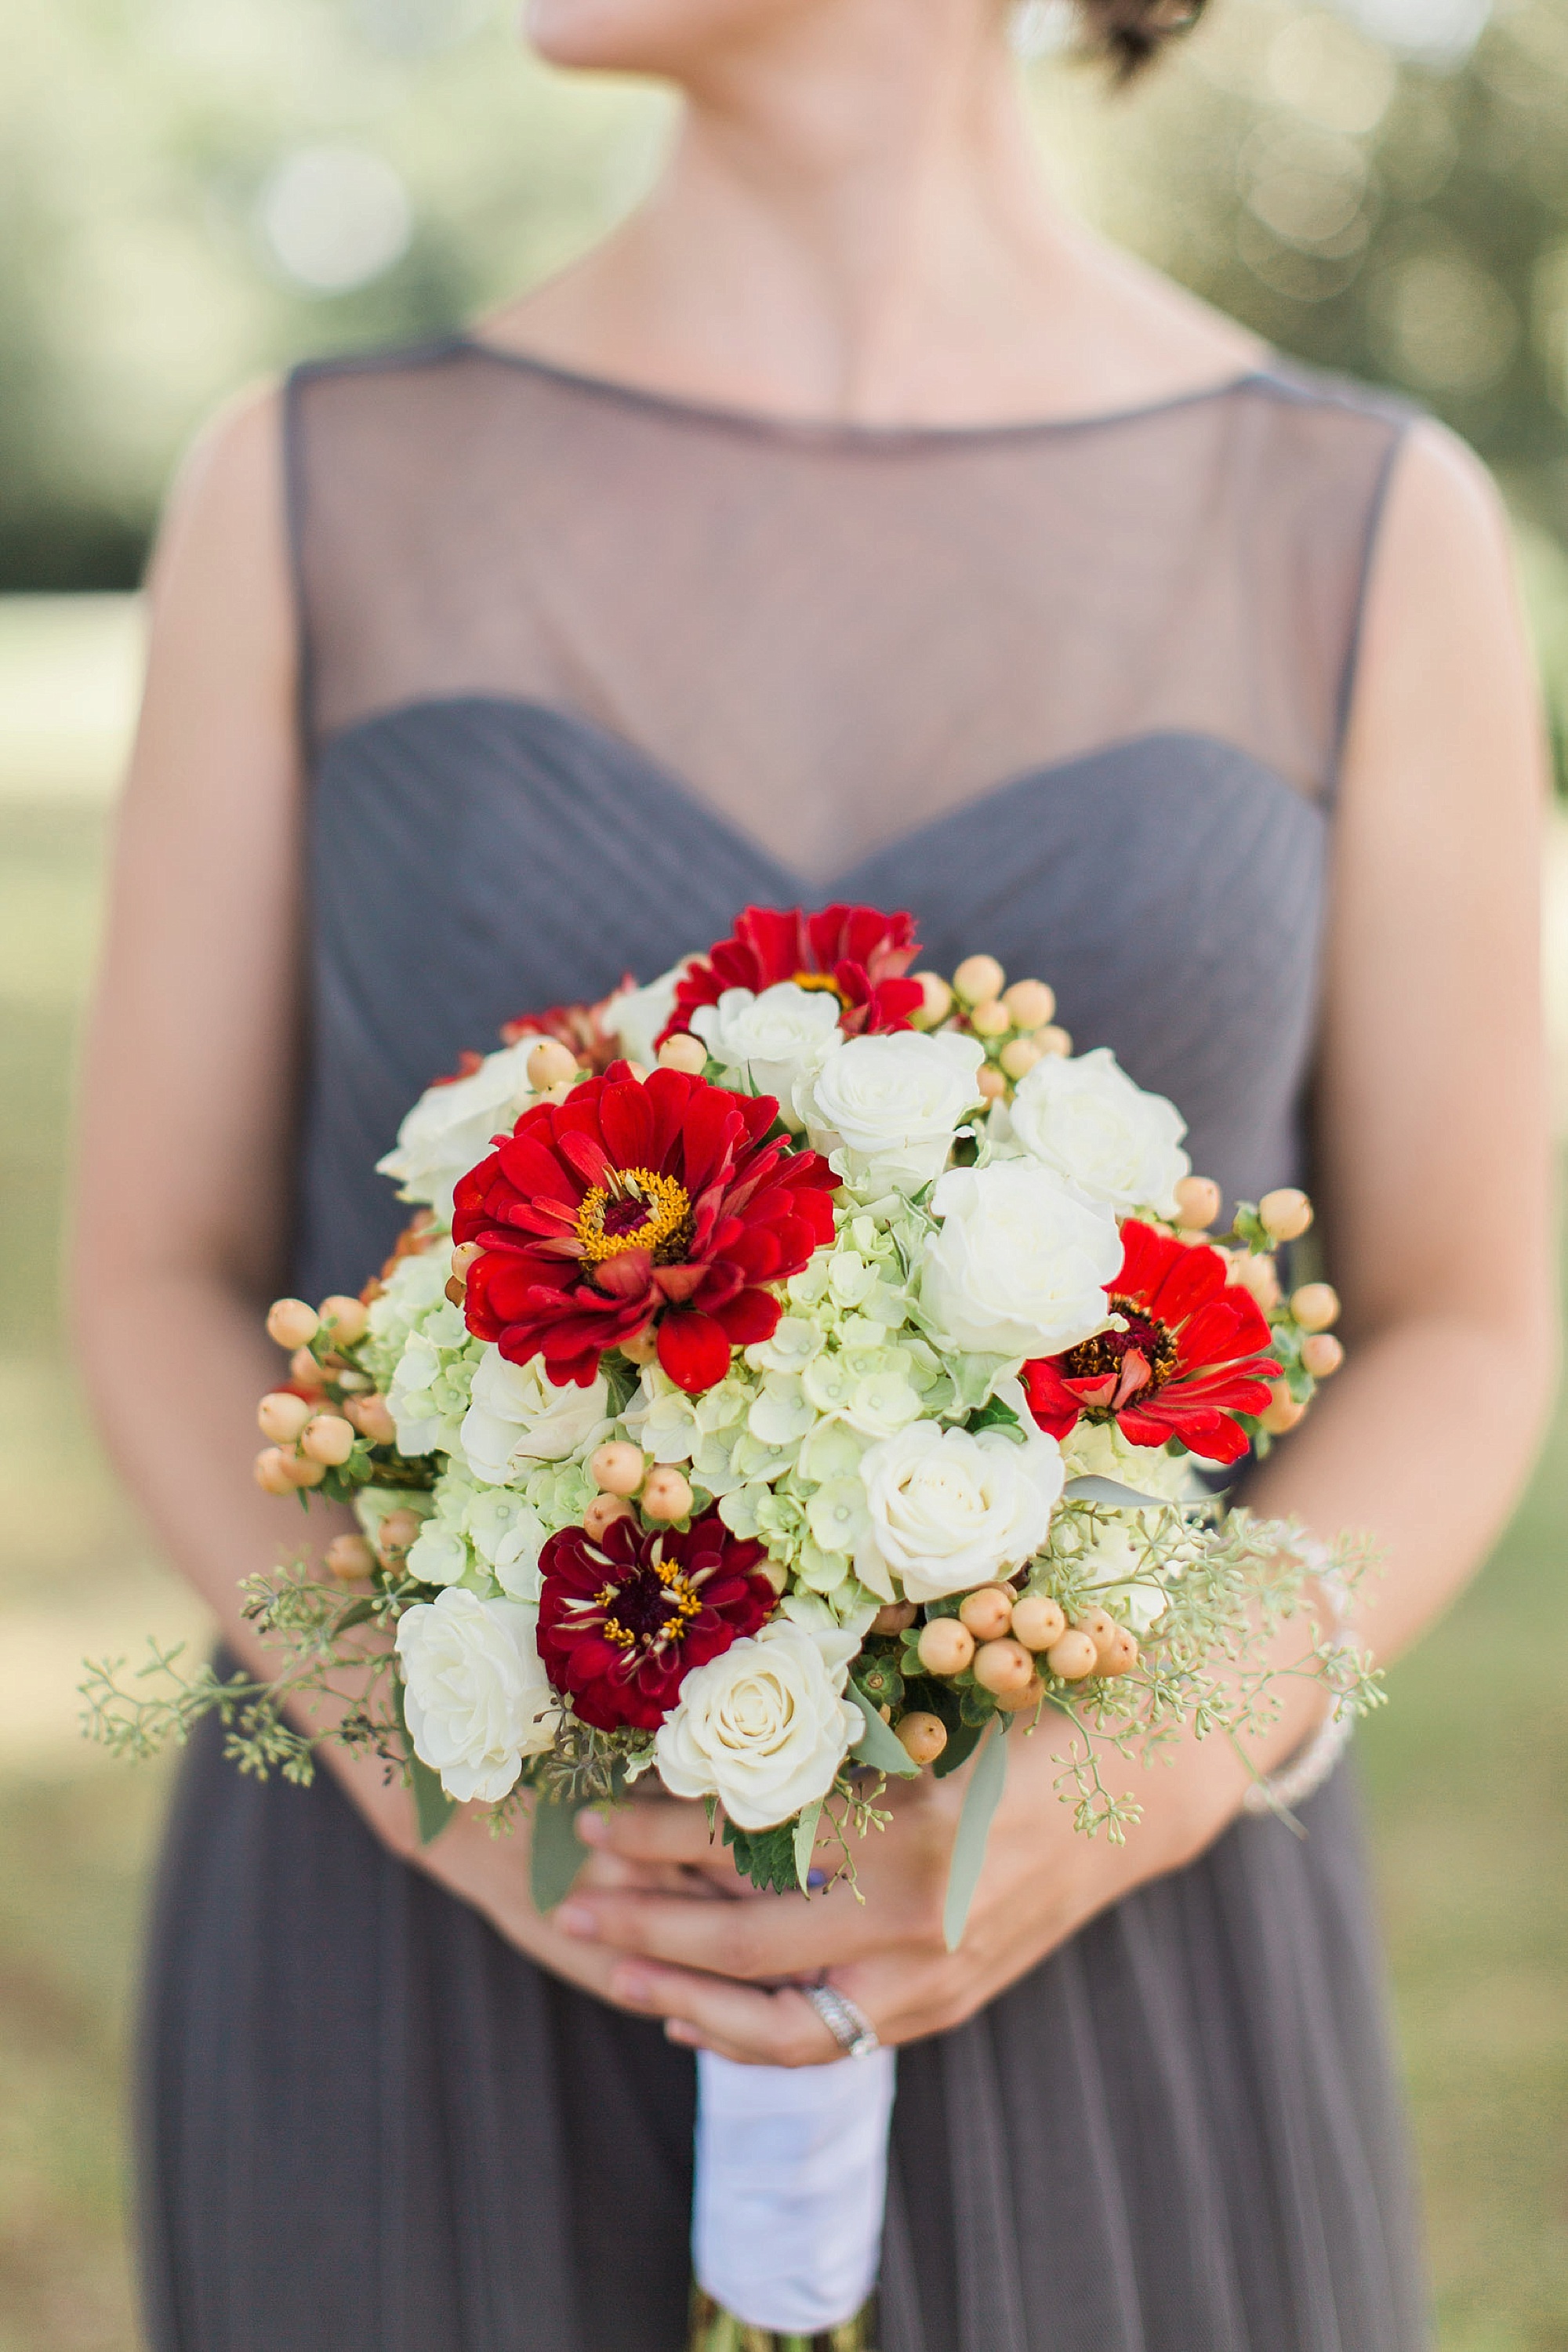 White and red wedding flowers